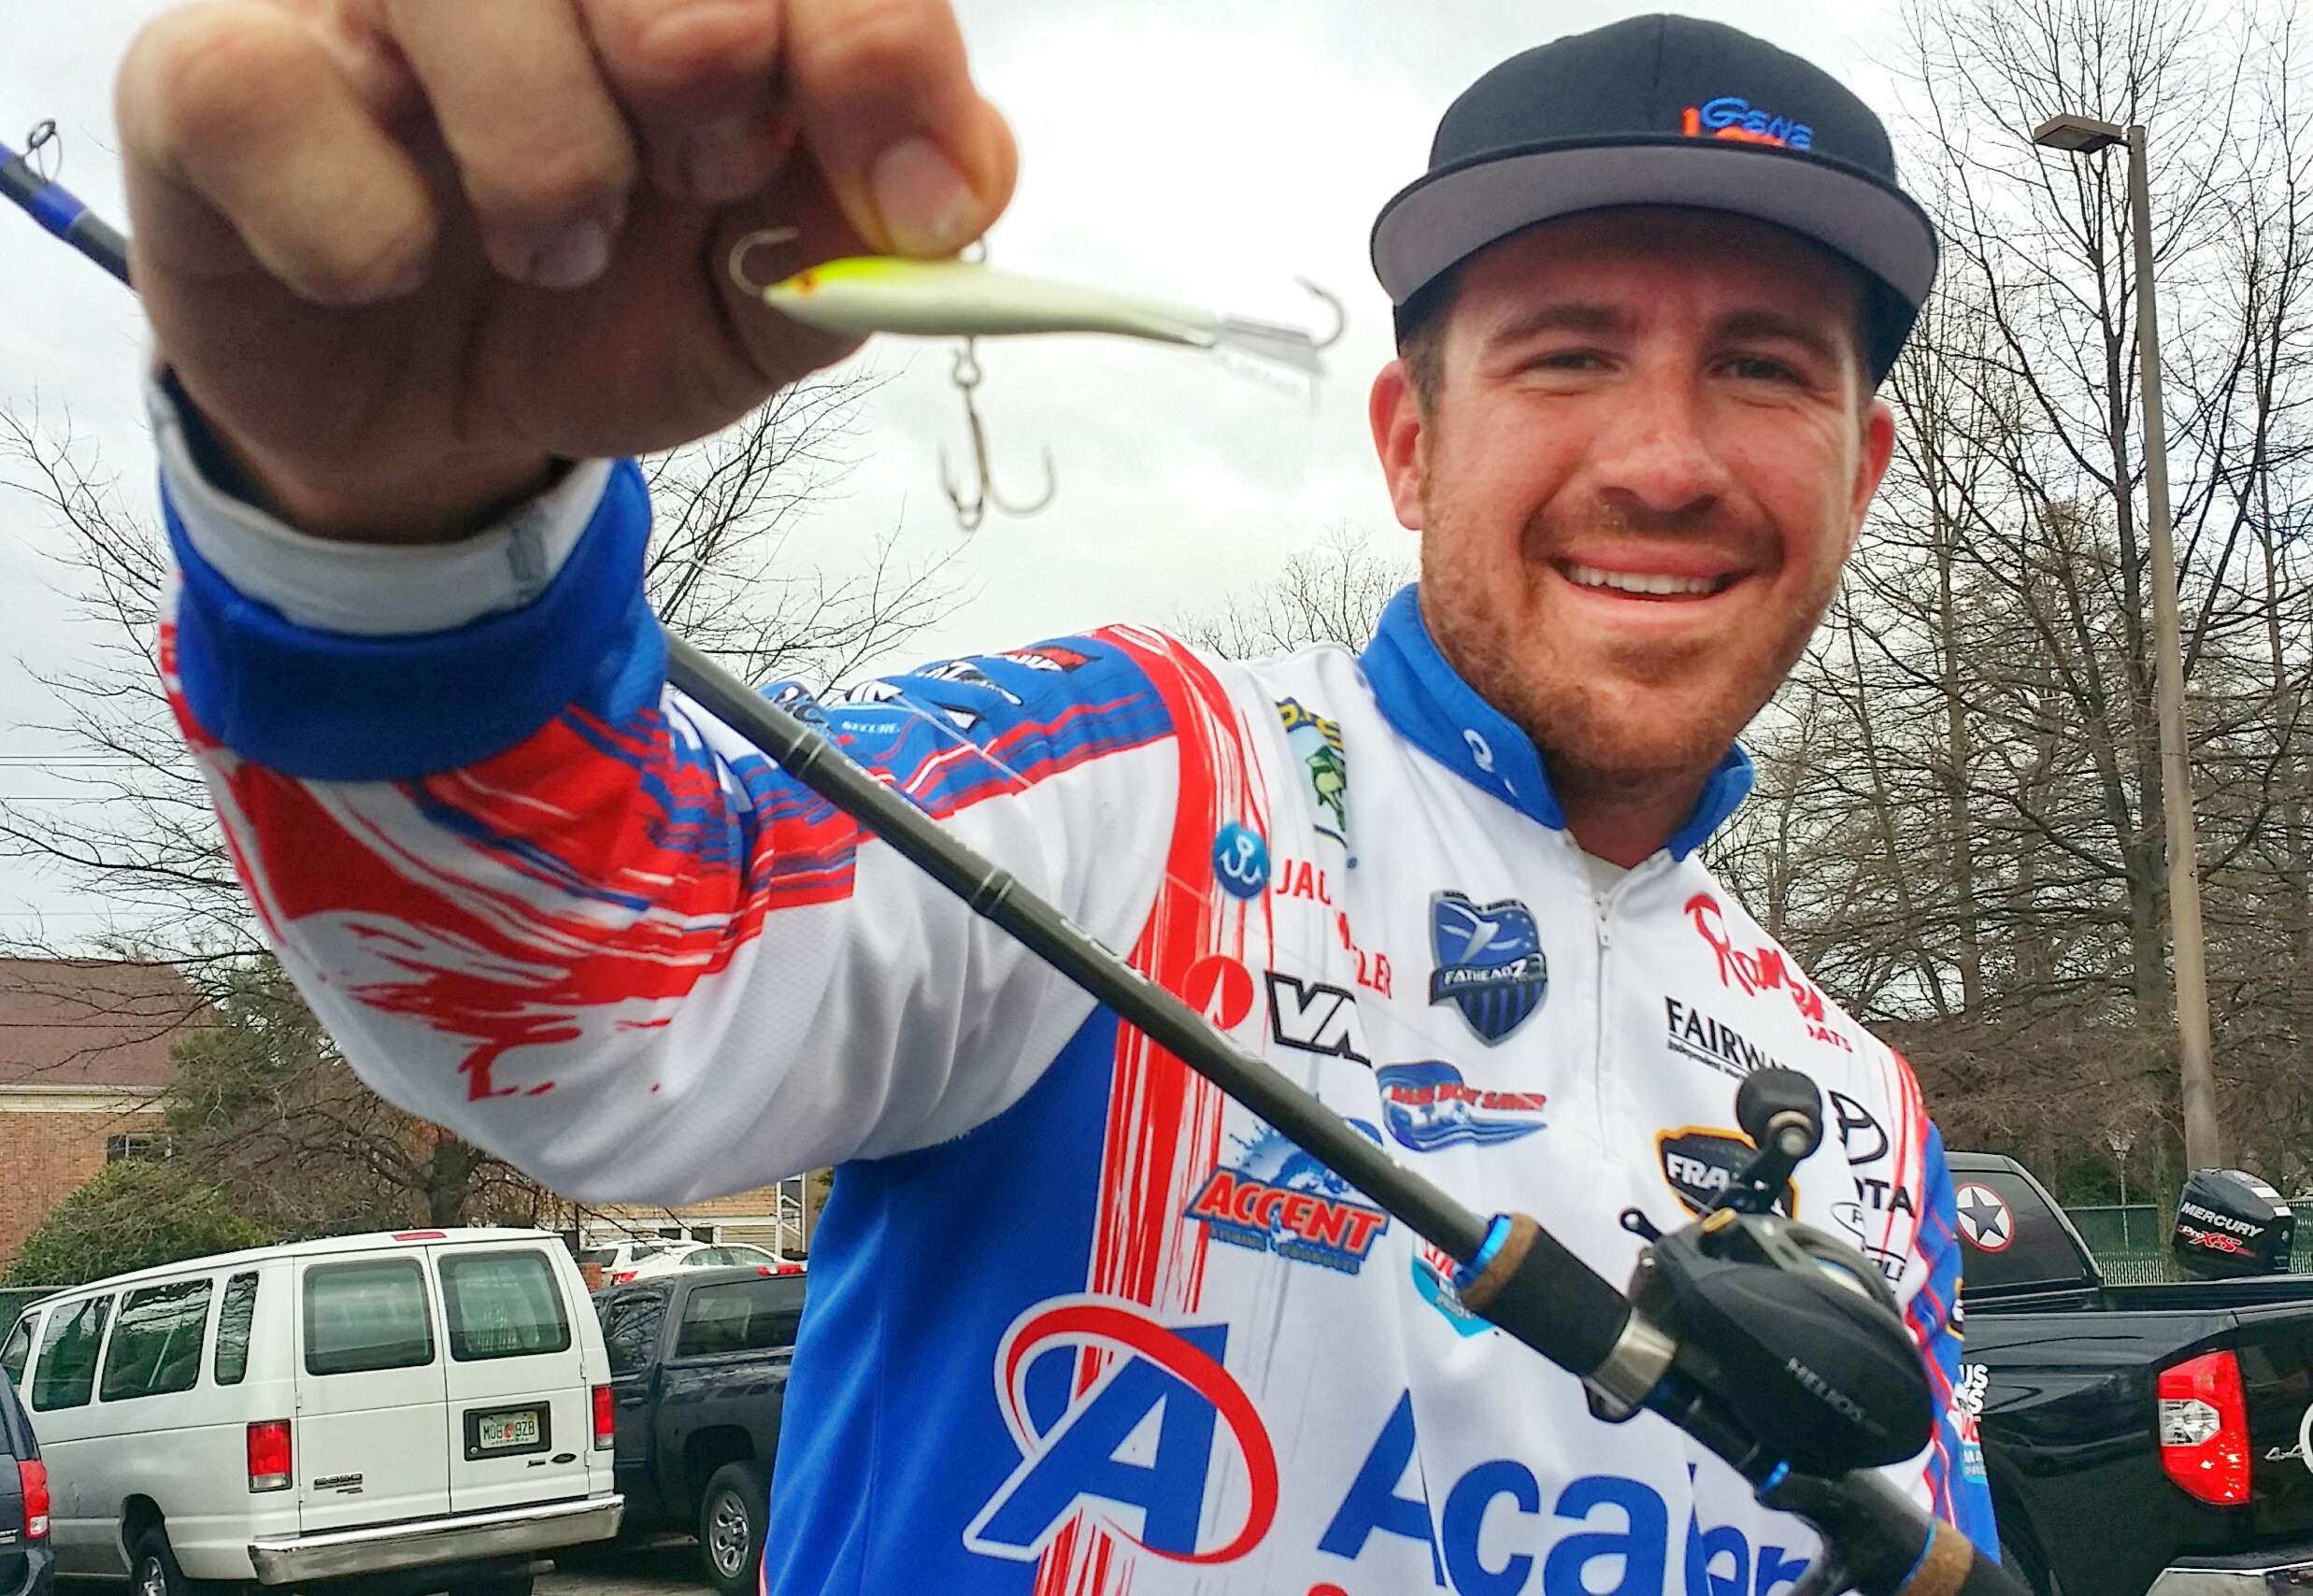 Believe it or not, Jacob Wheeler's best bait was an ice-fishing bait: a Rapala Jigging Rap (glow). He fished that, a Fish Stalker Pro Shad Spin (horsehead) and a dropshot in 13-40 feet in mid-lake pockets and ditches. He also fished the new Rapala Shadow Rap jerkbait (moss back shiner) shallow around herring in creeks.